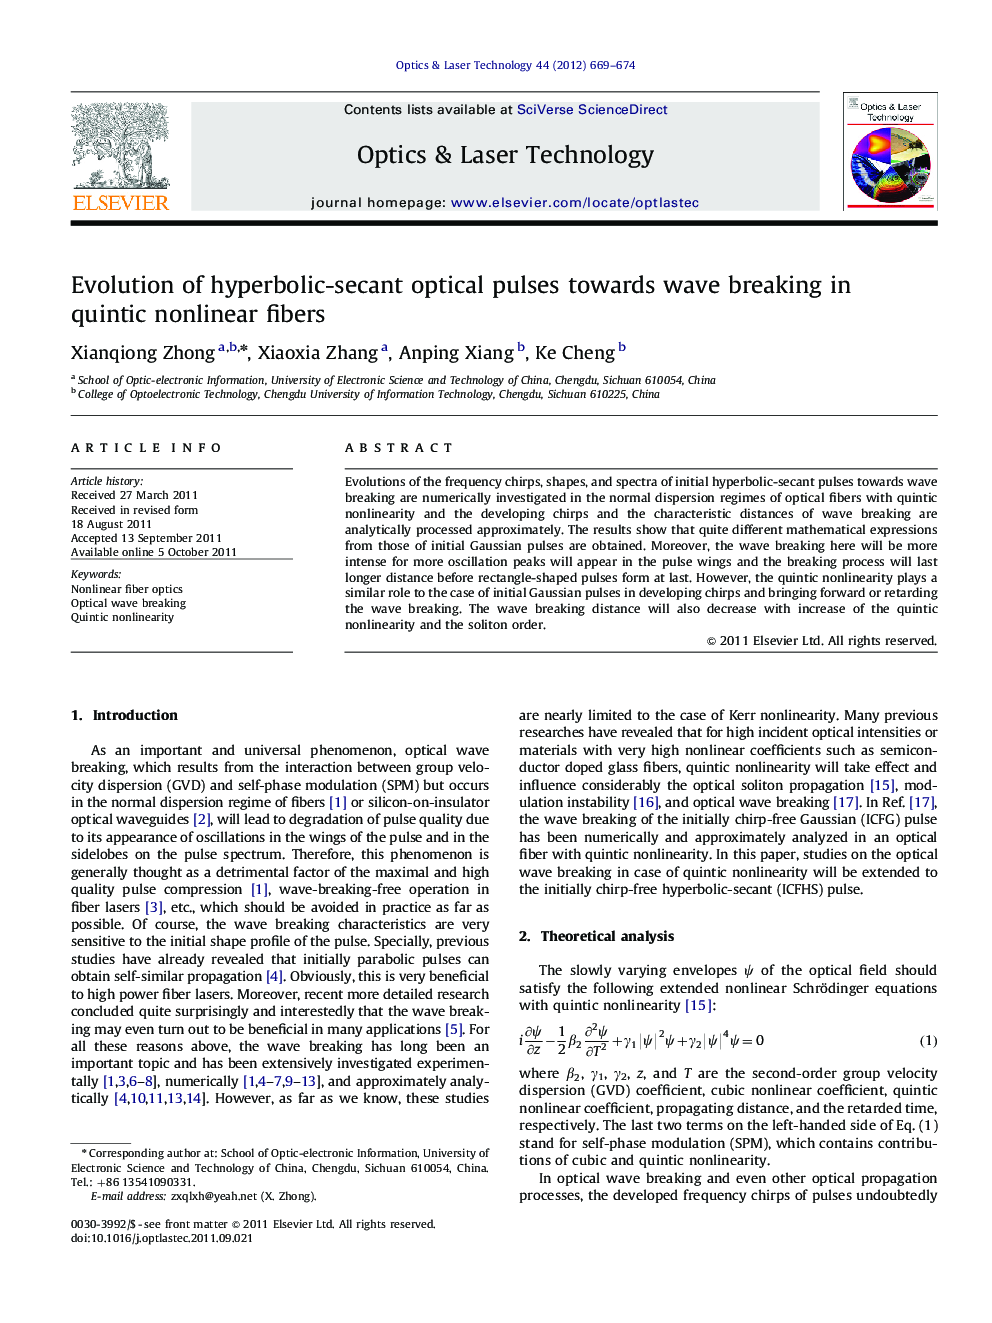 Evolution of hyperbolic-secant optical pulses towards wave breaking in quintic nonlinear fibers